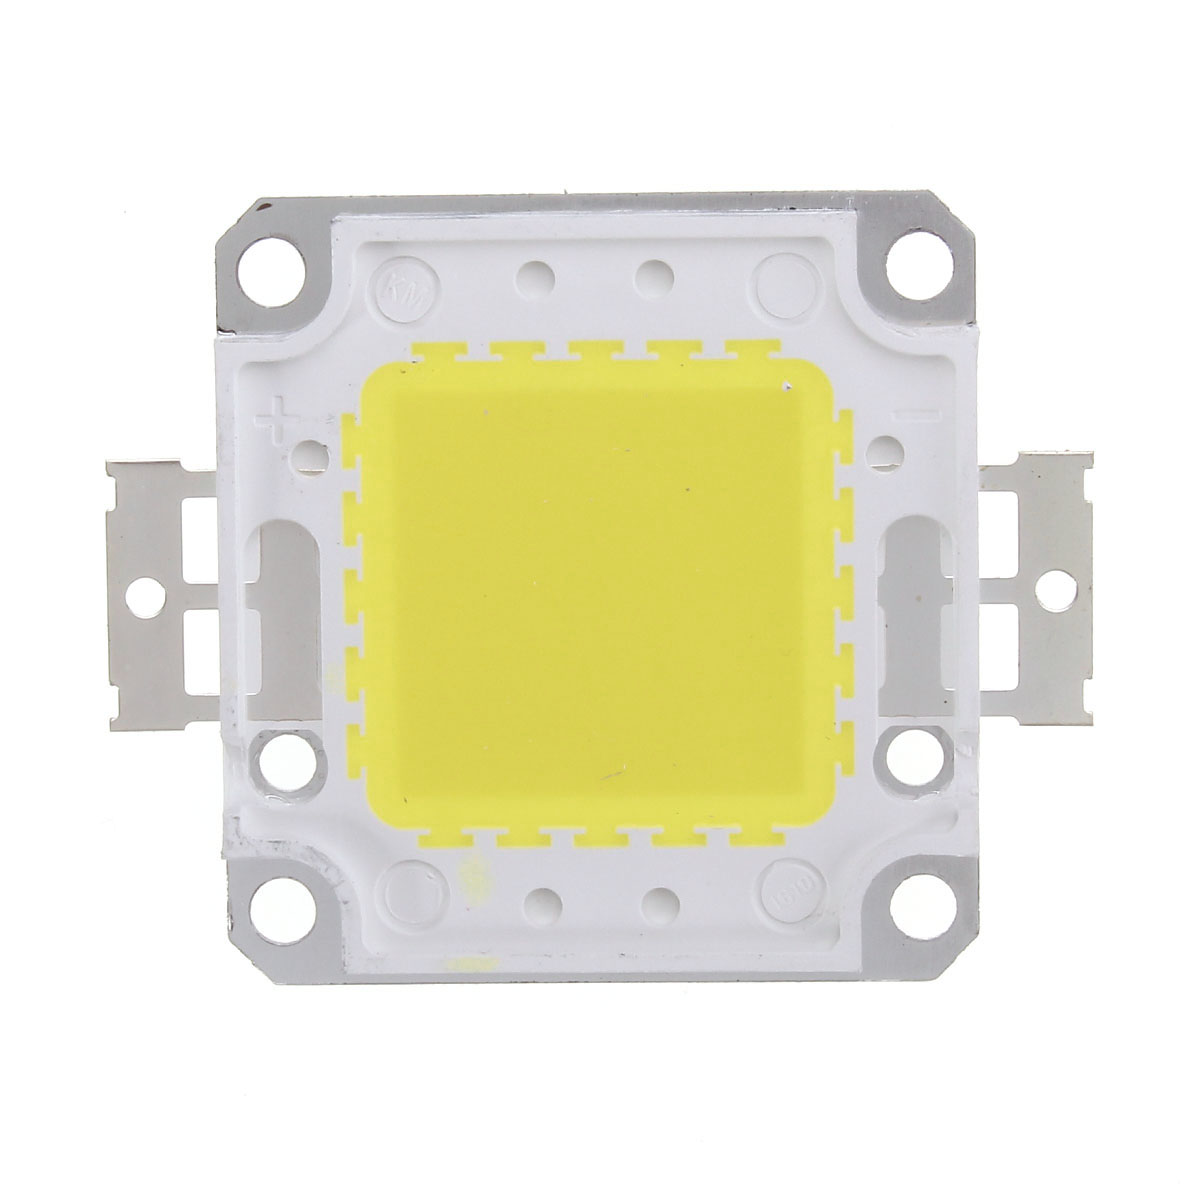 AC85-265V-45W-Waterproof-High-Power--LED-Driver-Supply-SMD-Chip-for-Flood-Light-1161102-4